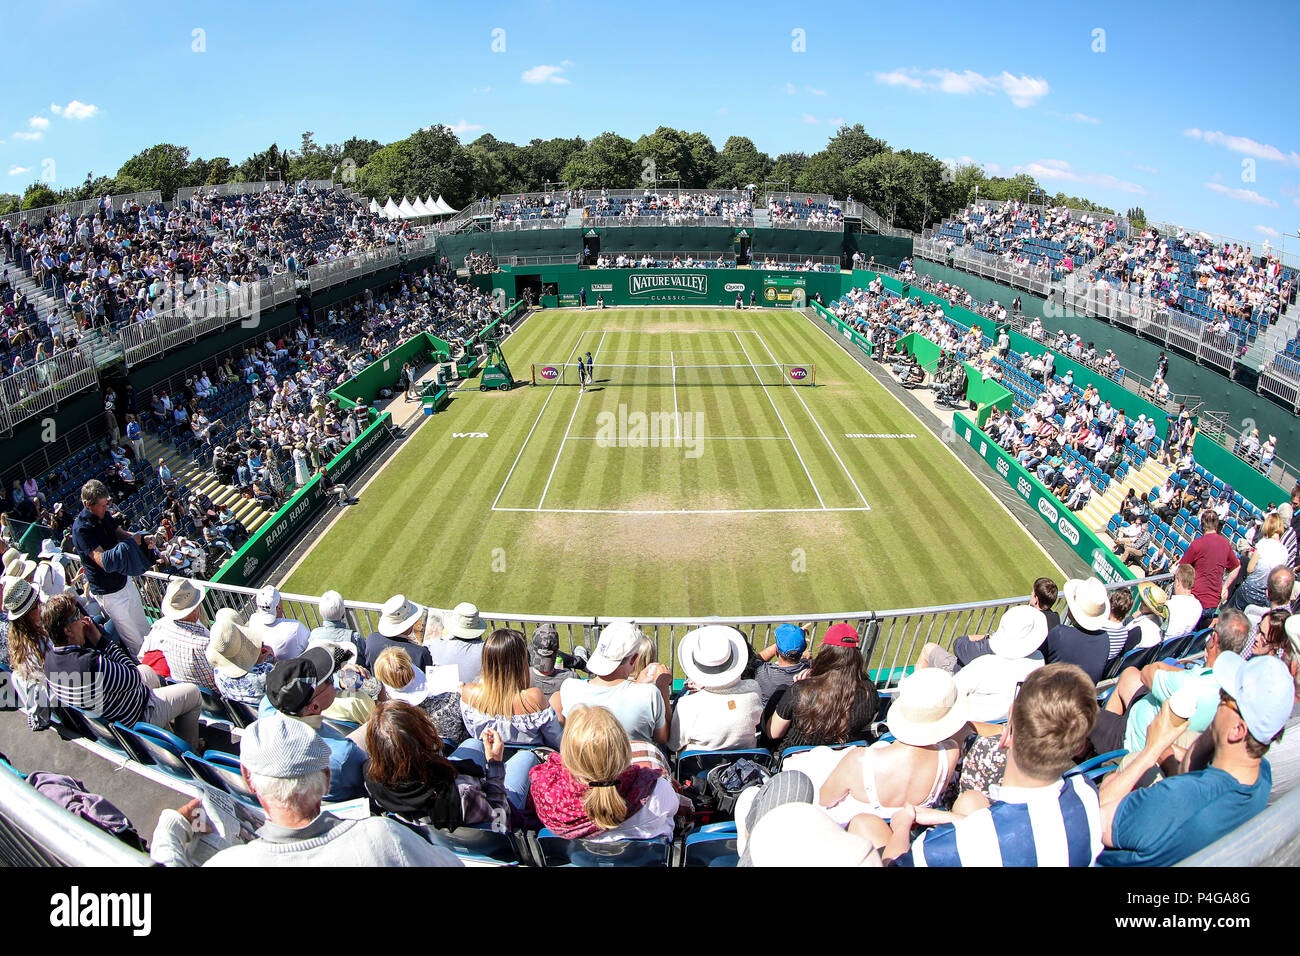 Edgbaston Priory Club, Birmingham, UK. 22nd June, 2018. Nature Valley Classic Tennis; A full crowd gets ready for the Petra KVITOVA (CZE) Julia Goerges (GER) Credit: Action Plus Sports/Alamy